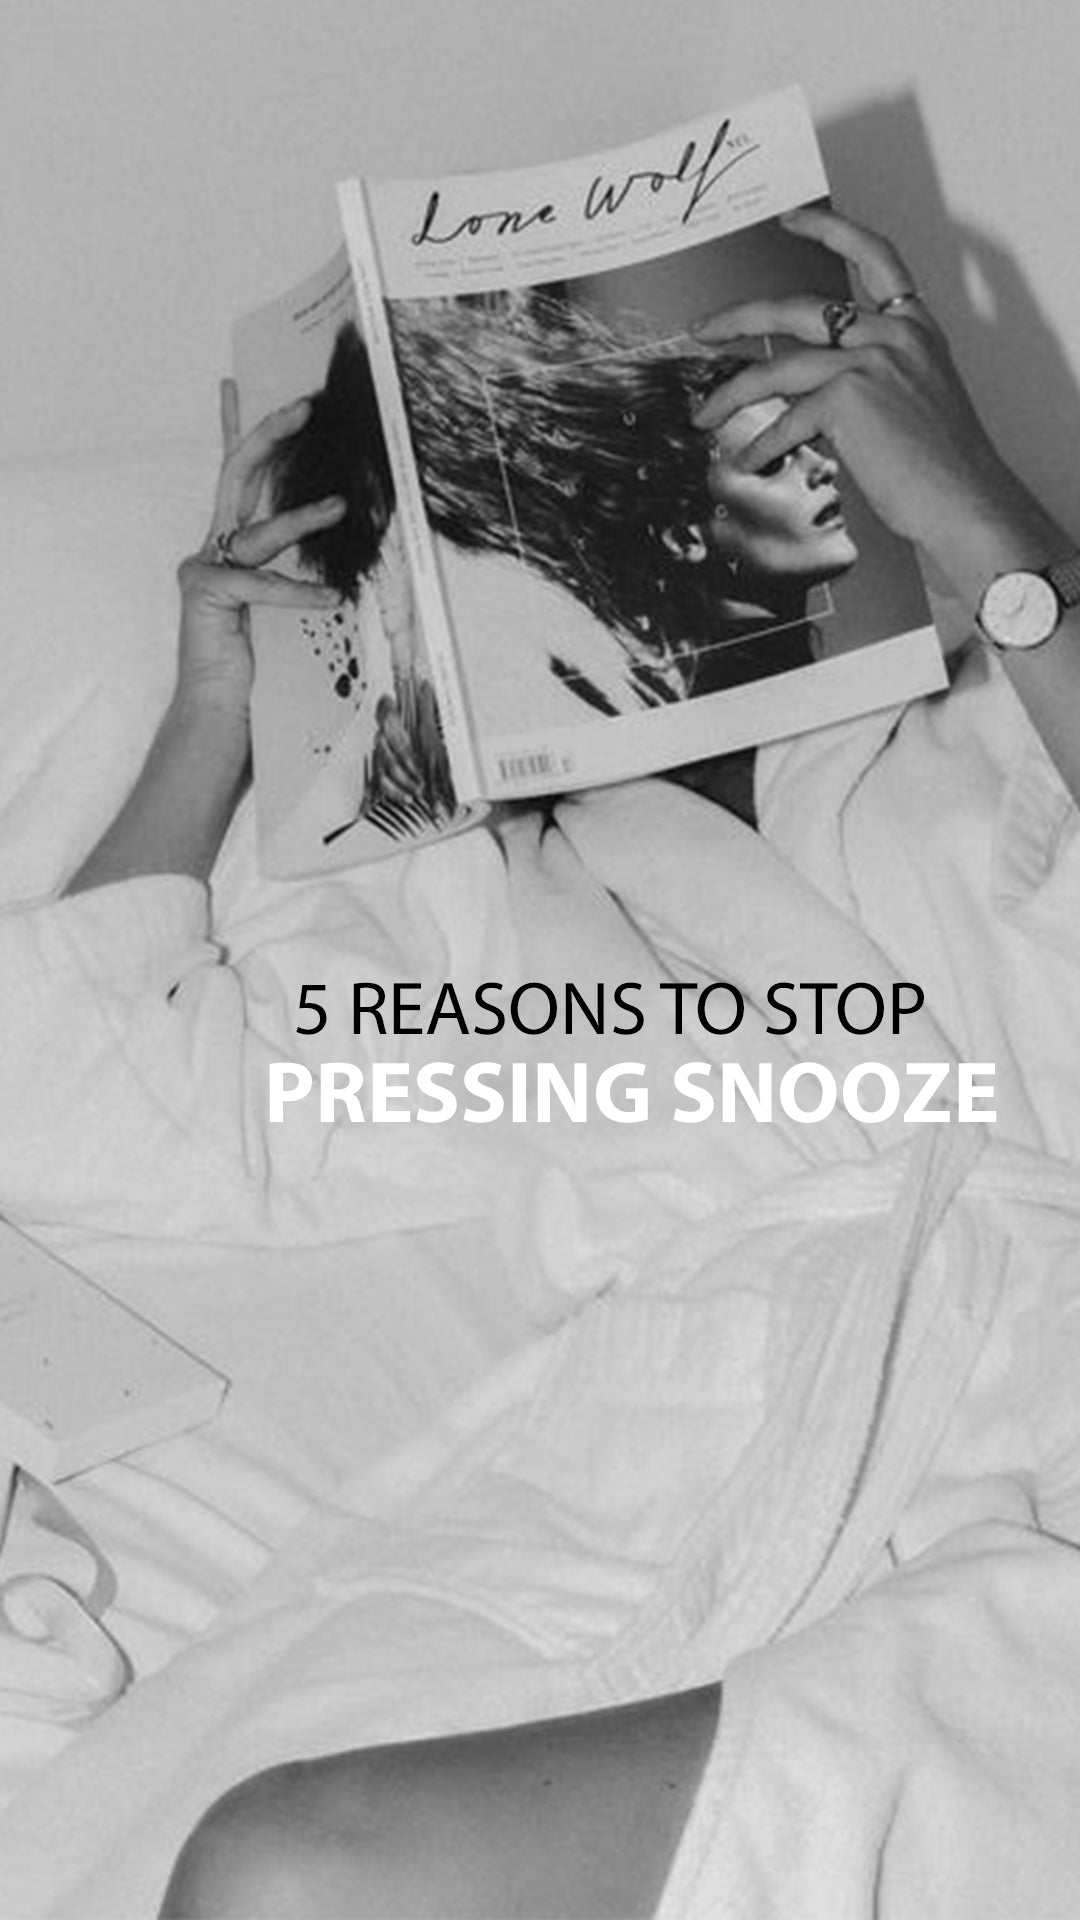 5 Reasons To Stop Pressing Snooze